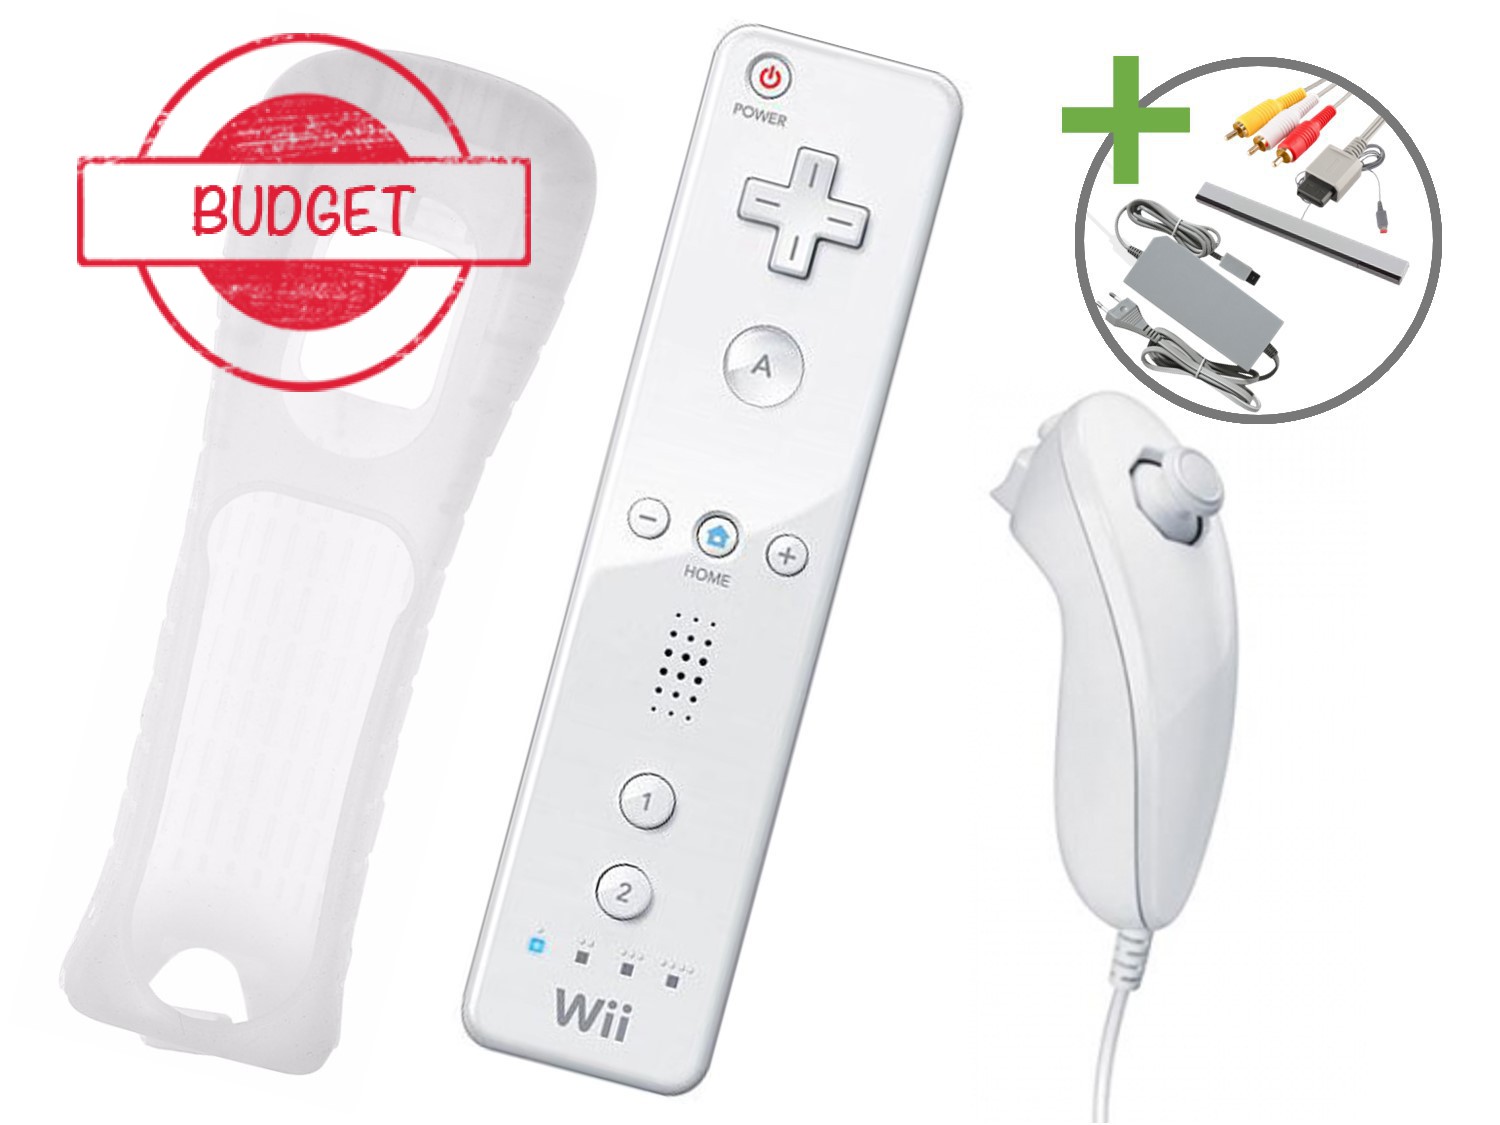 Nintendo Wii Starter Pack - The First of January Edition - Budget - Wii Hardware - 3